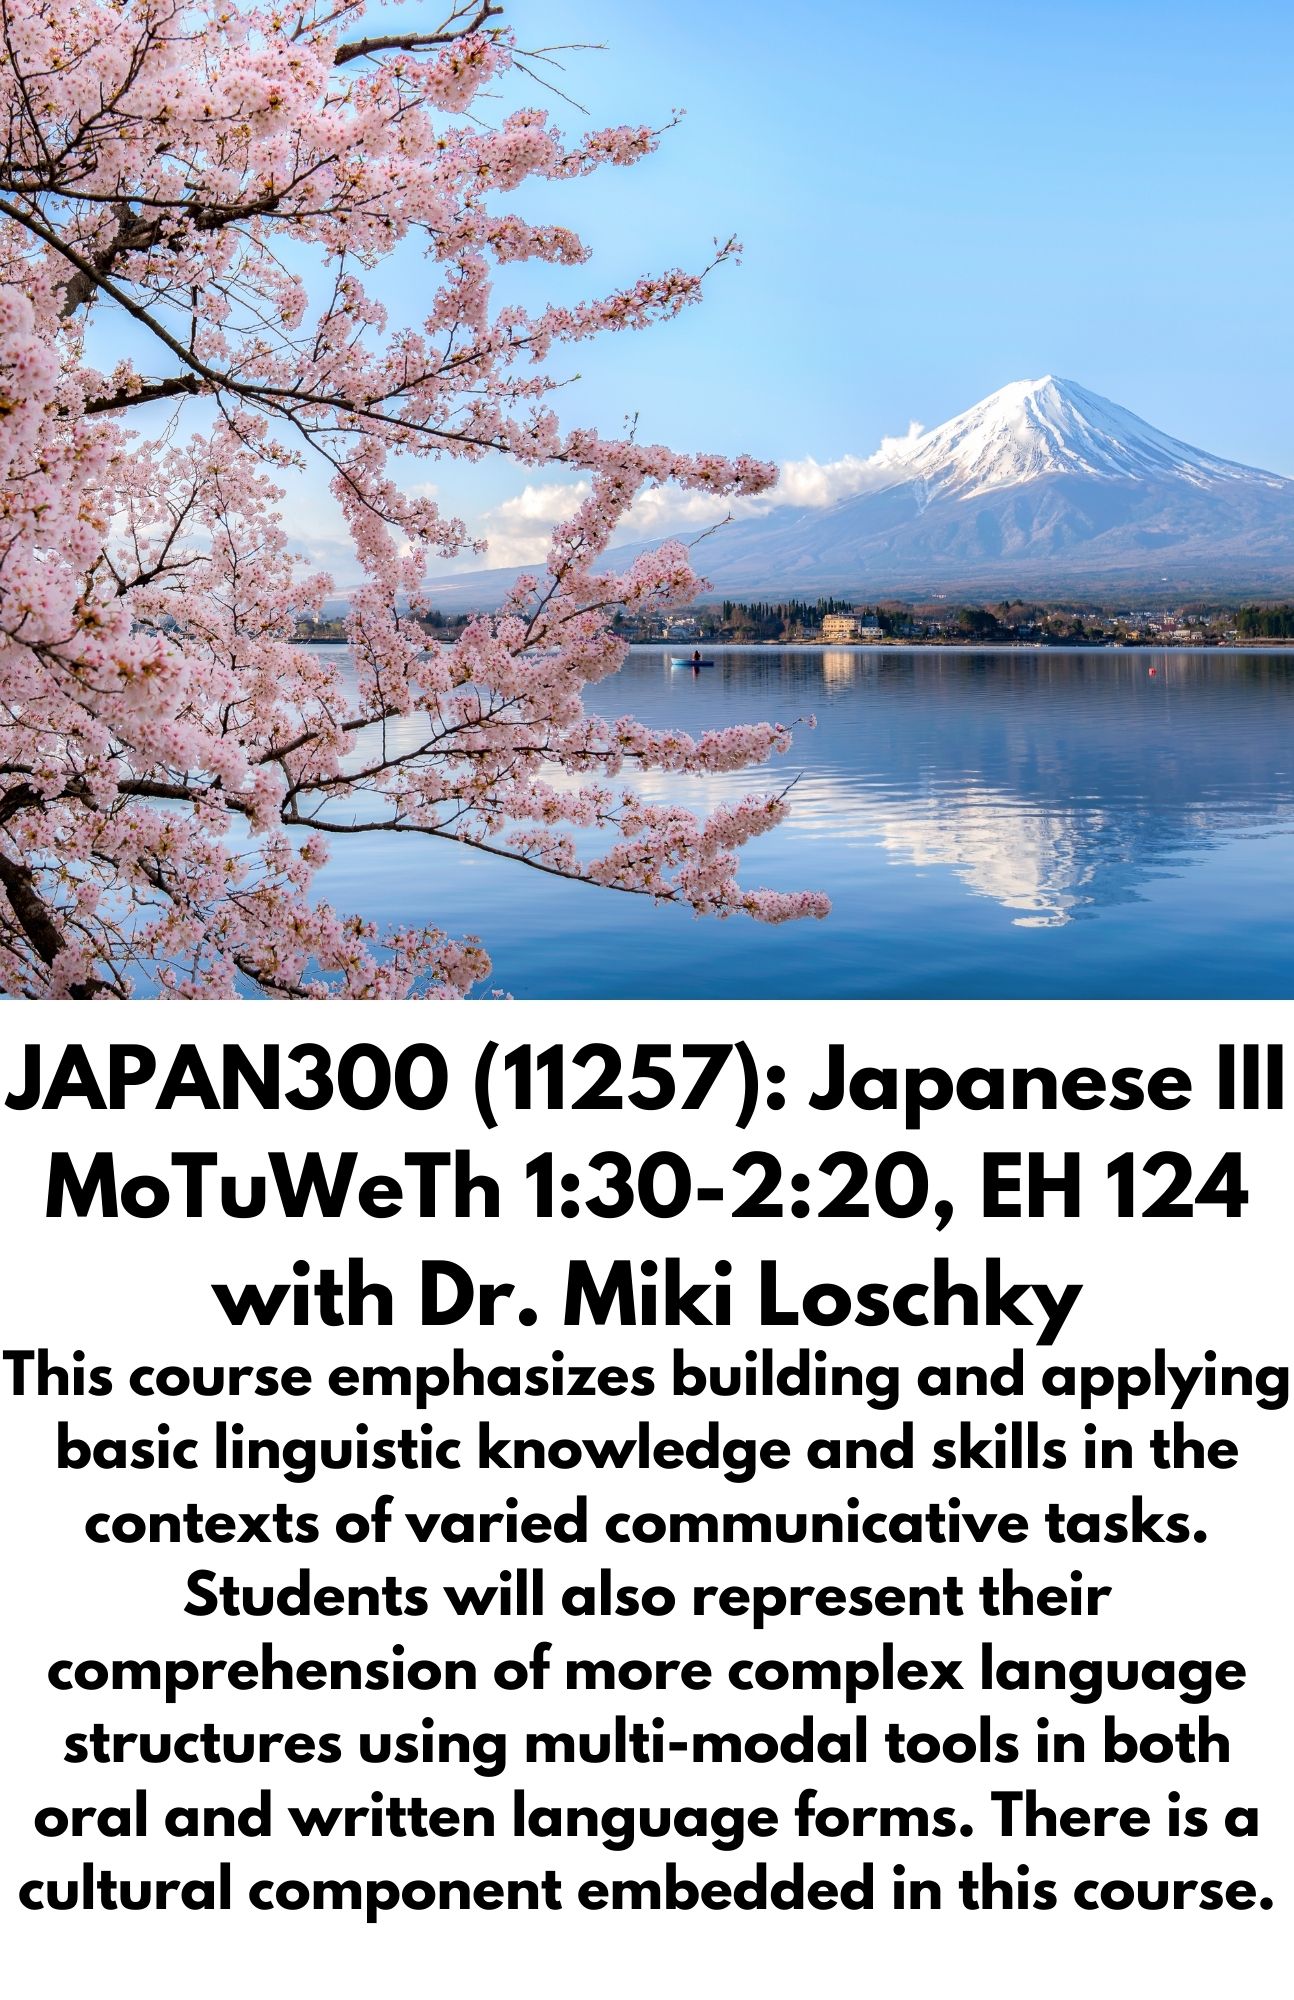 JAPAN300 (11257): Japanese III MoTuWeTh 1:30-2:20, EH 124 with Dr. Miki Loschky. This course emphasizes building and applying basic linguistic knowledge and skills in the contexts of varied communicative tasks. Students will also represent their comprehension of more complex language structures using multi-modal tools in both oral and written language forms. There is a cultural component embedded in this course.